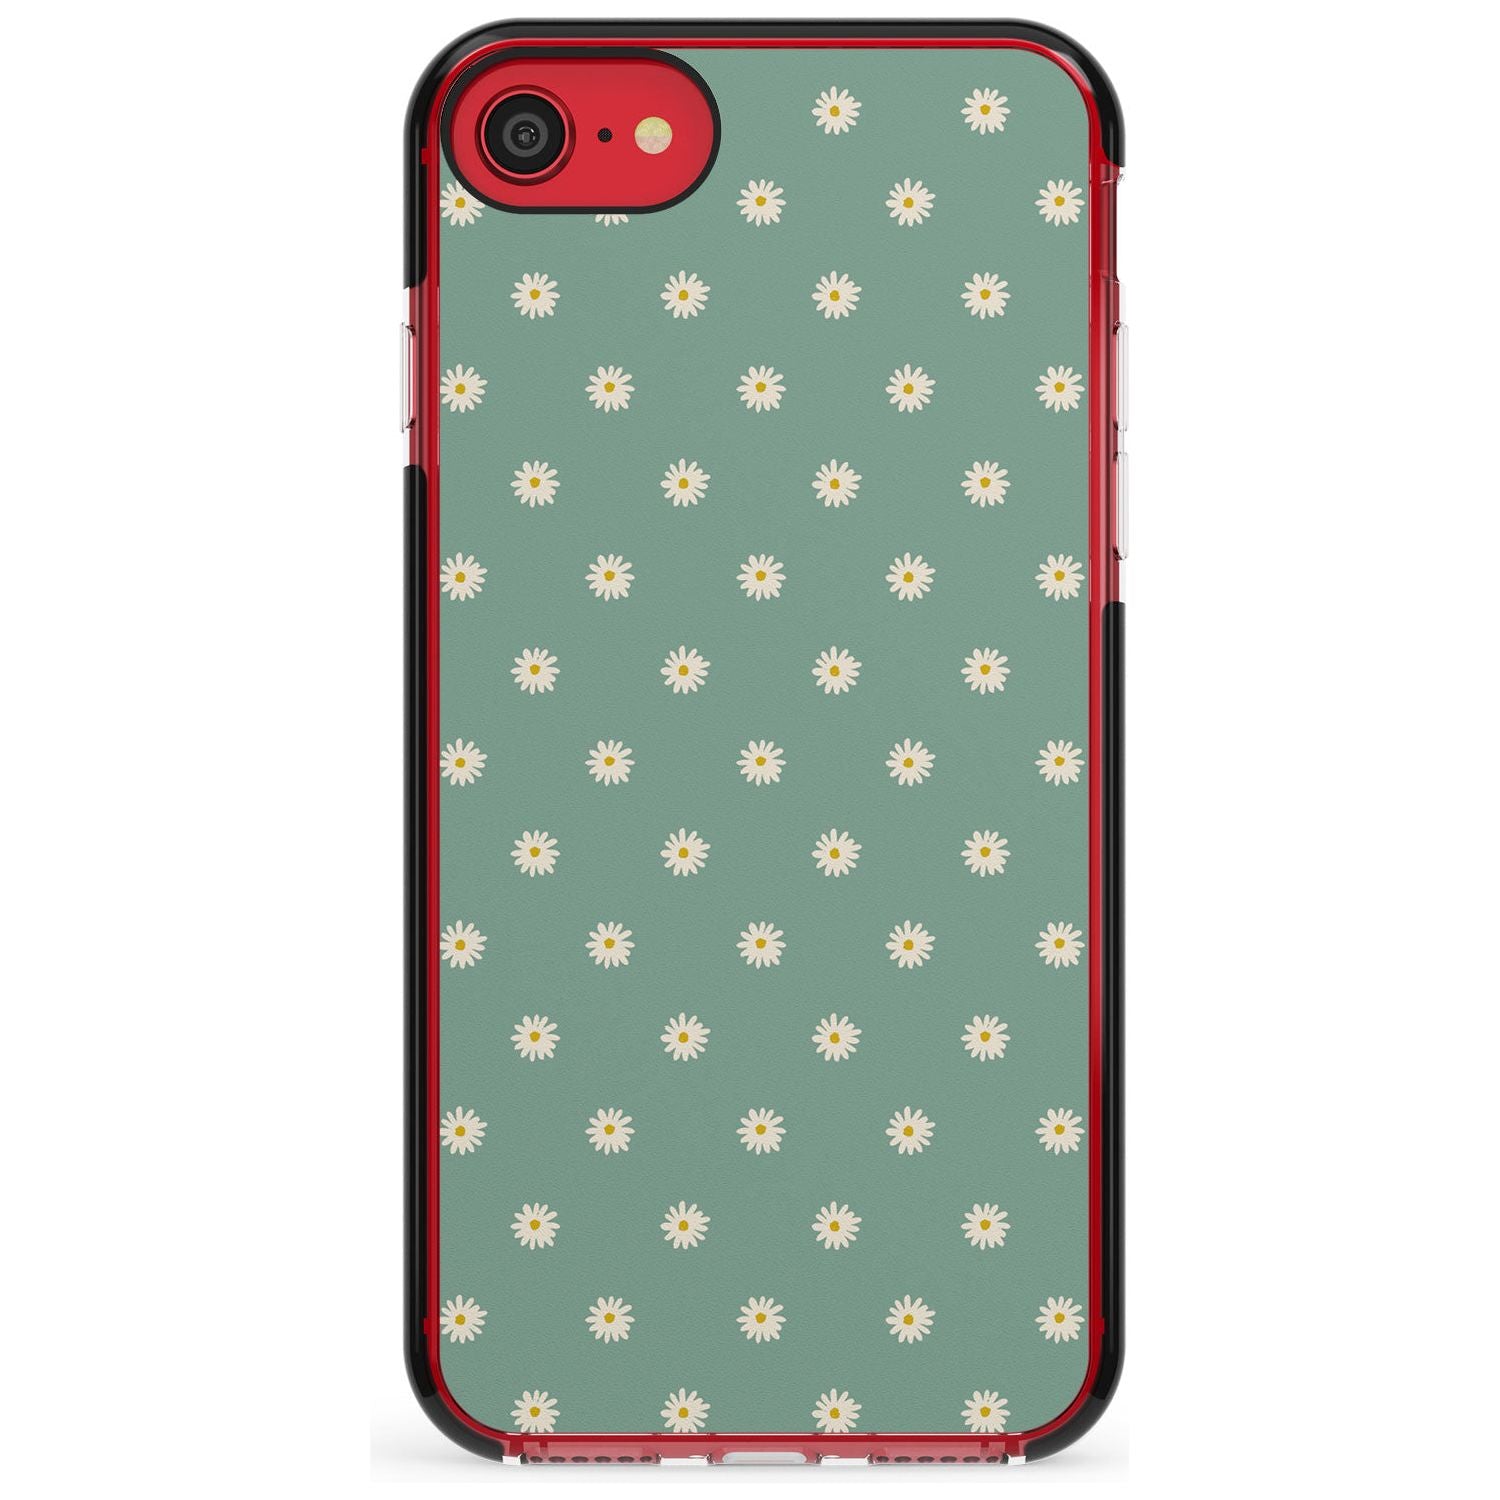 Daisy Pattern - Teal Cute Floral Daisy Design Pink Fade Impact Phone Case for iPhone SE 8 7 Plus